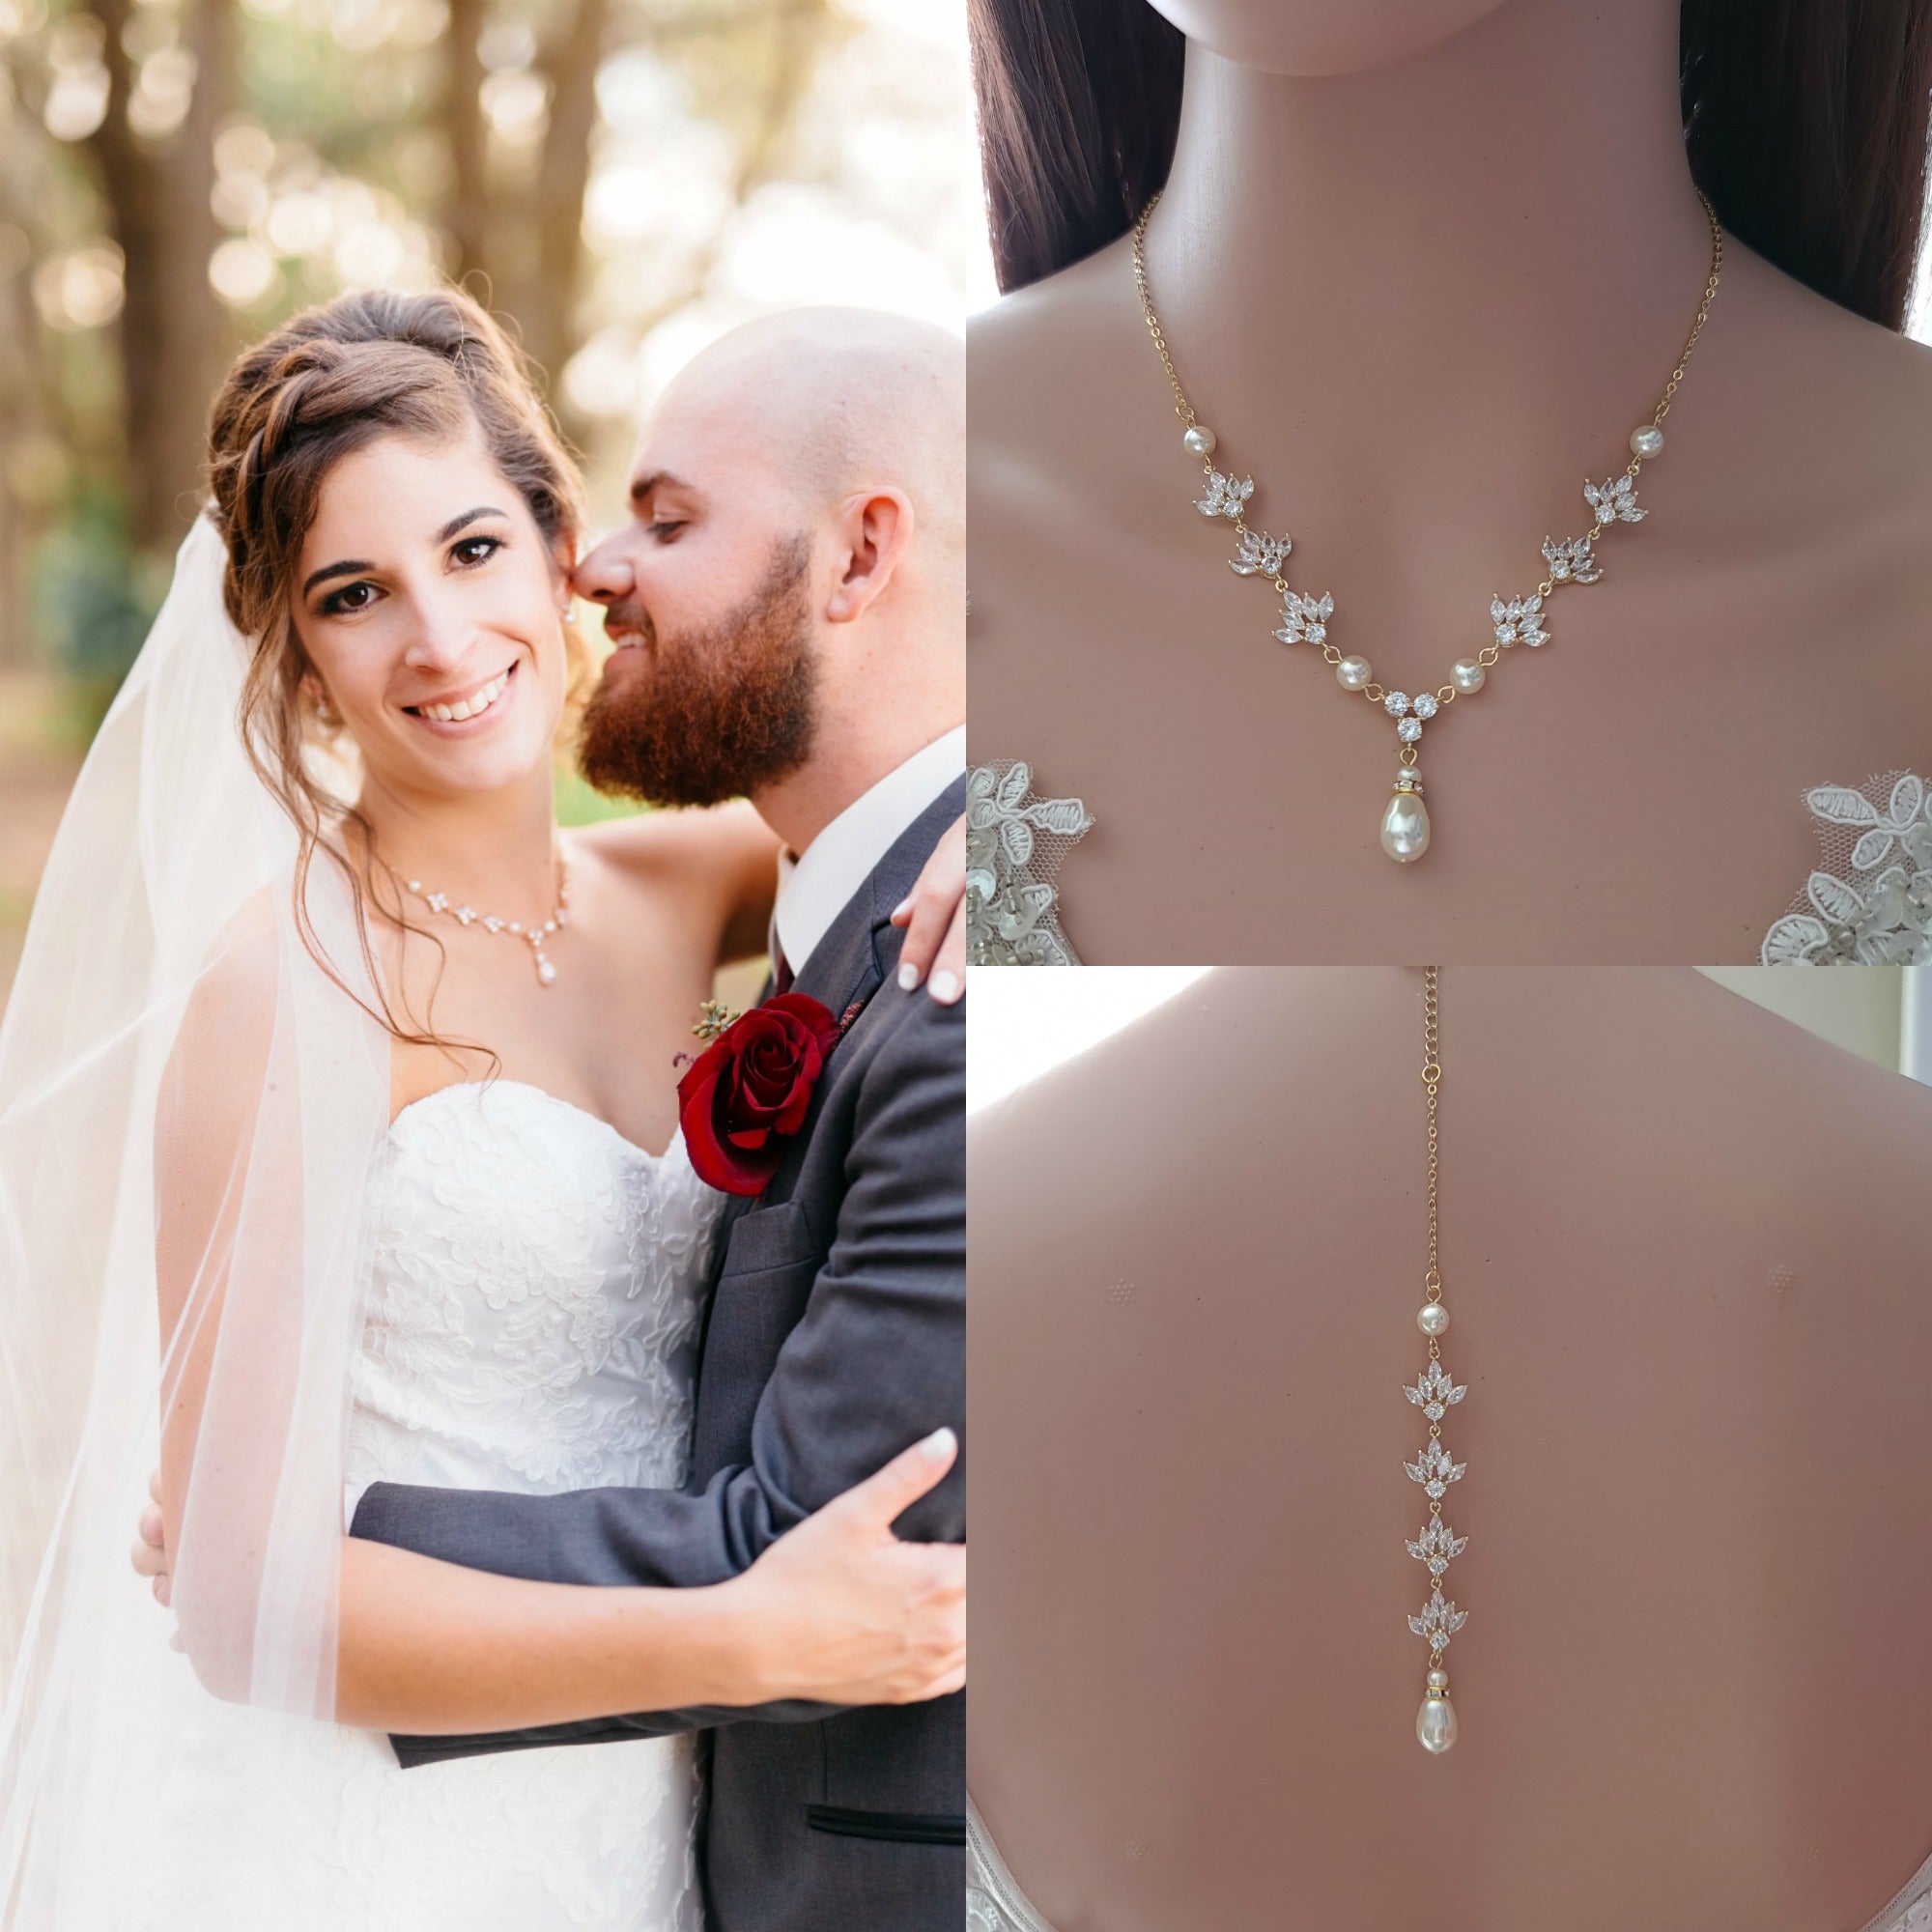 Necklace To My Daughter On Her Wedding Day, Love India | Ubuy